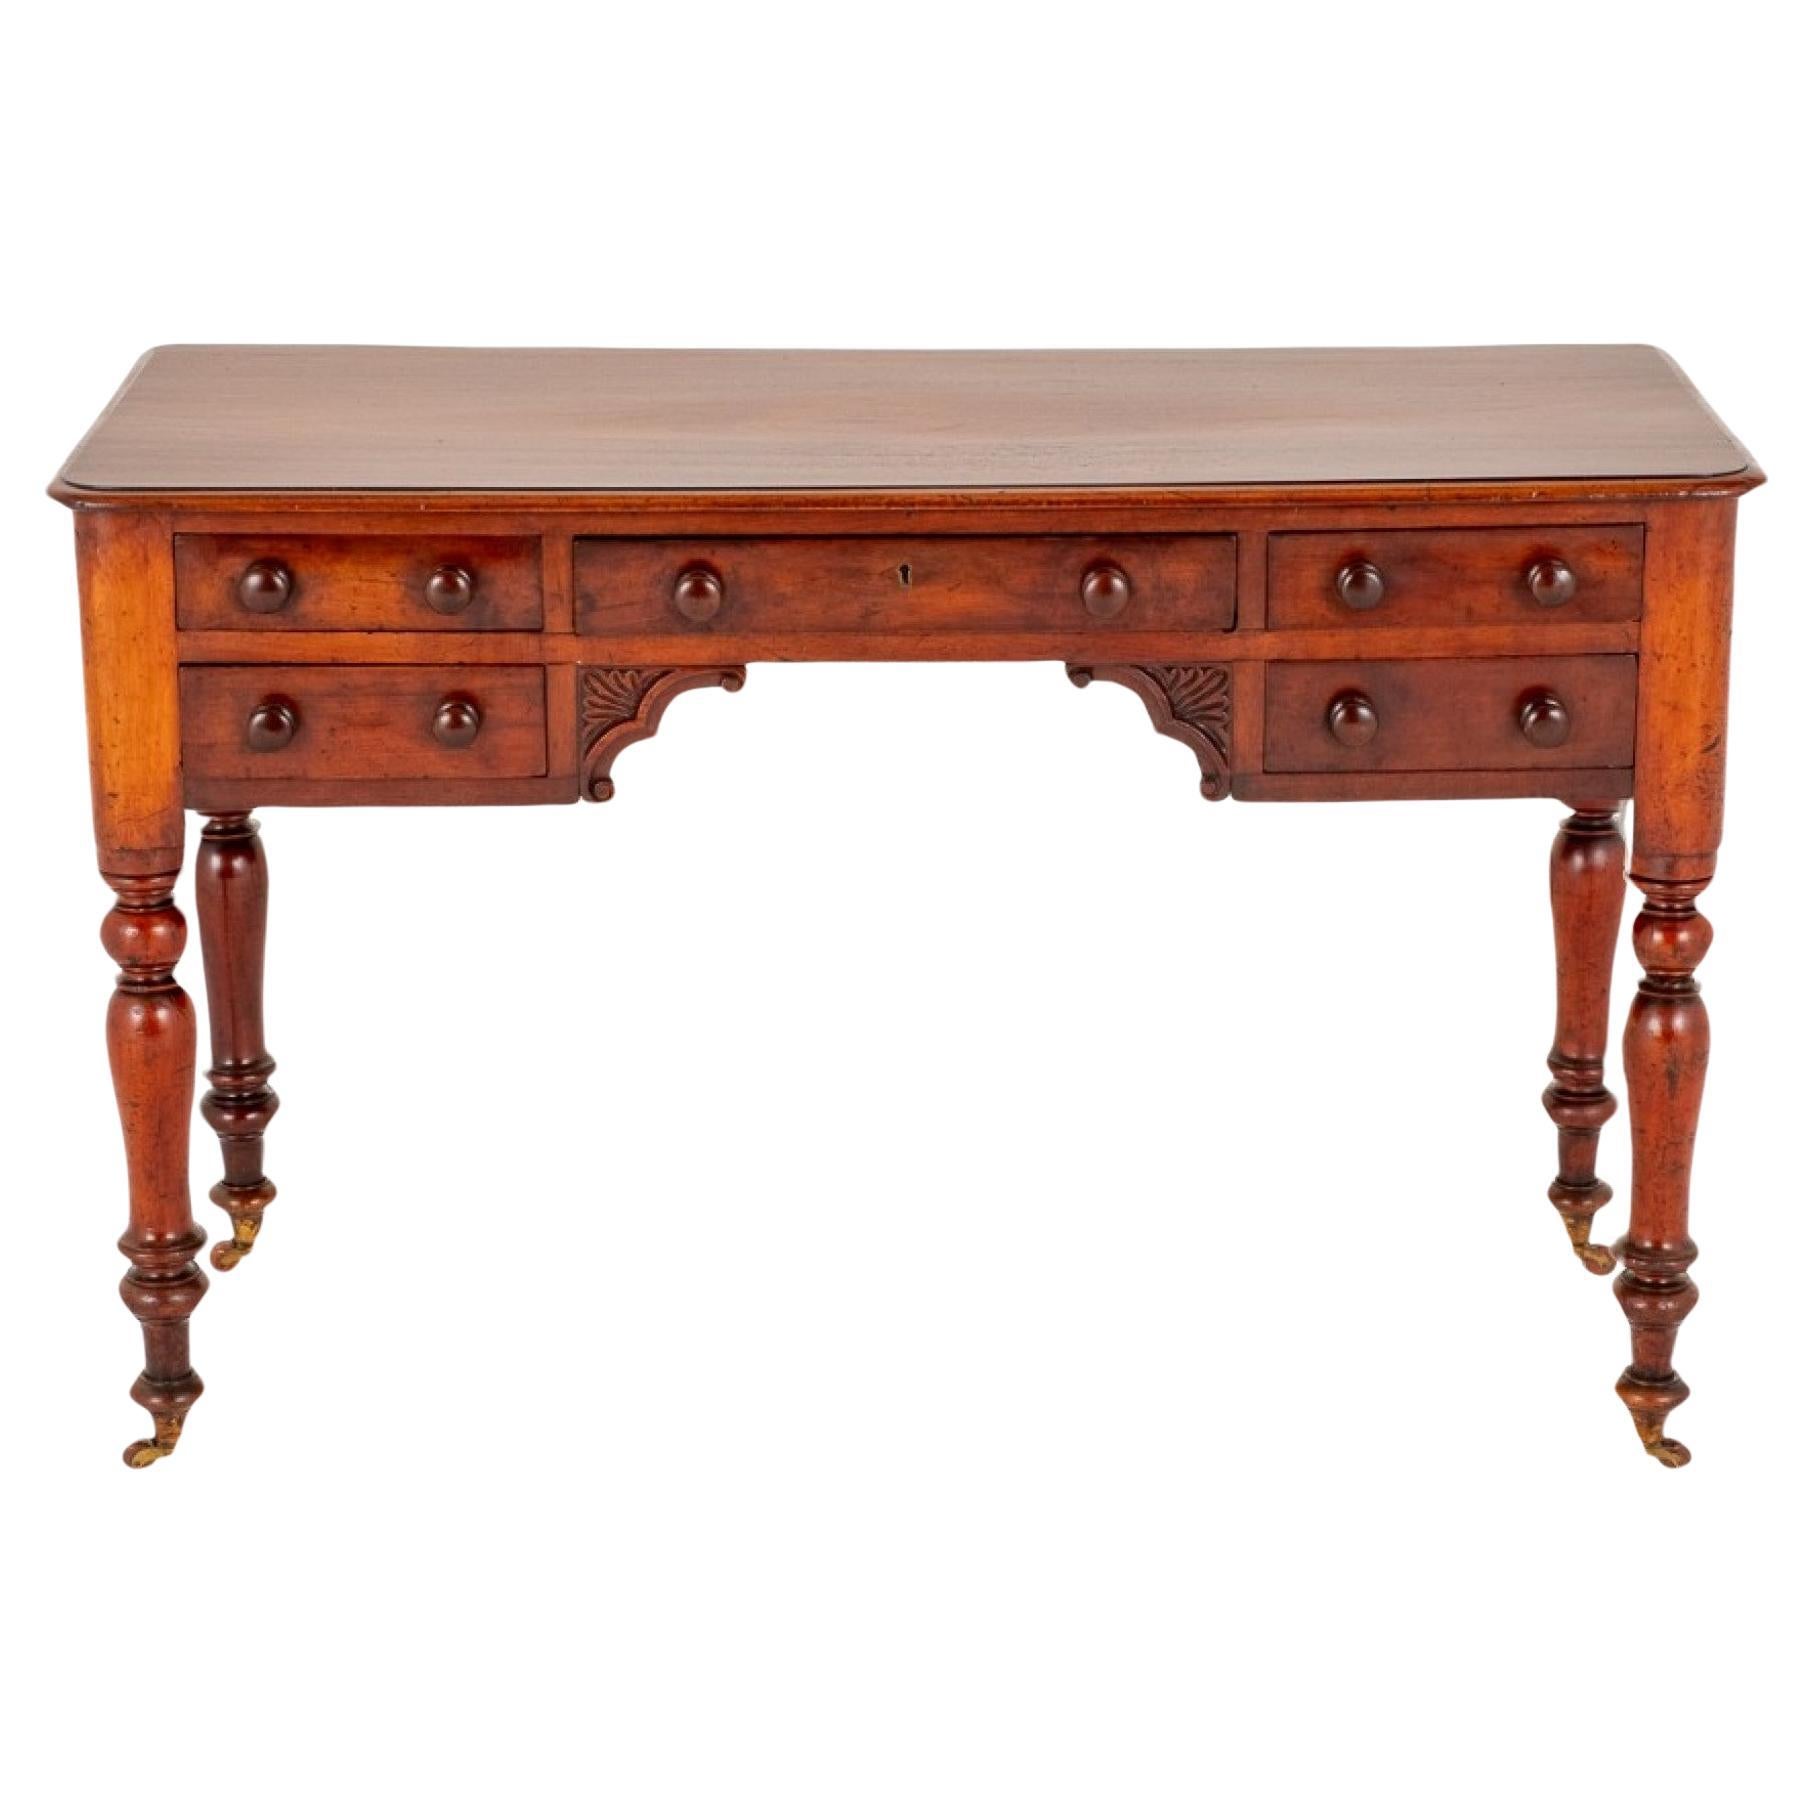 Antique Writing Table Victorian Mahogany Desk 1870 For Sale